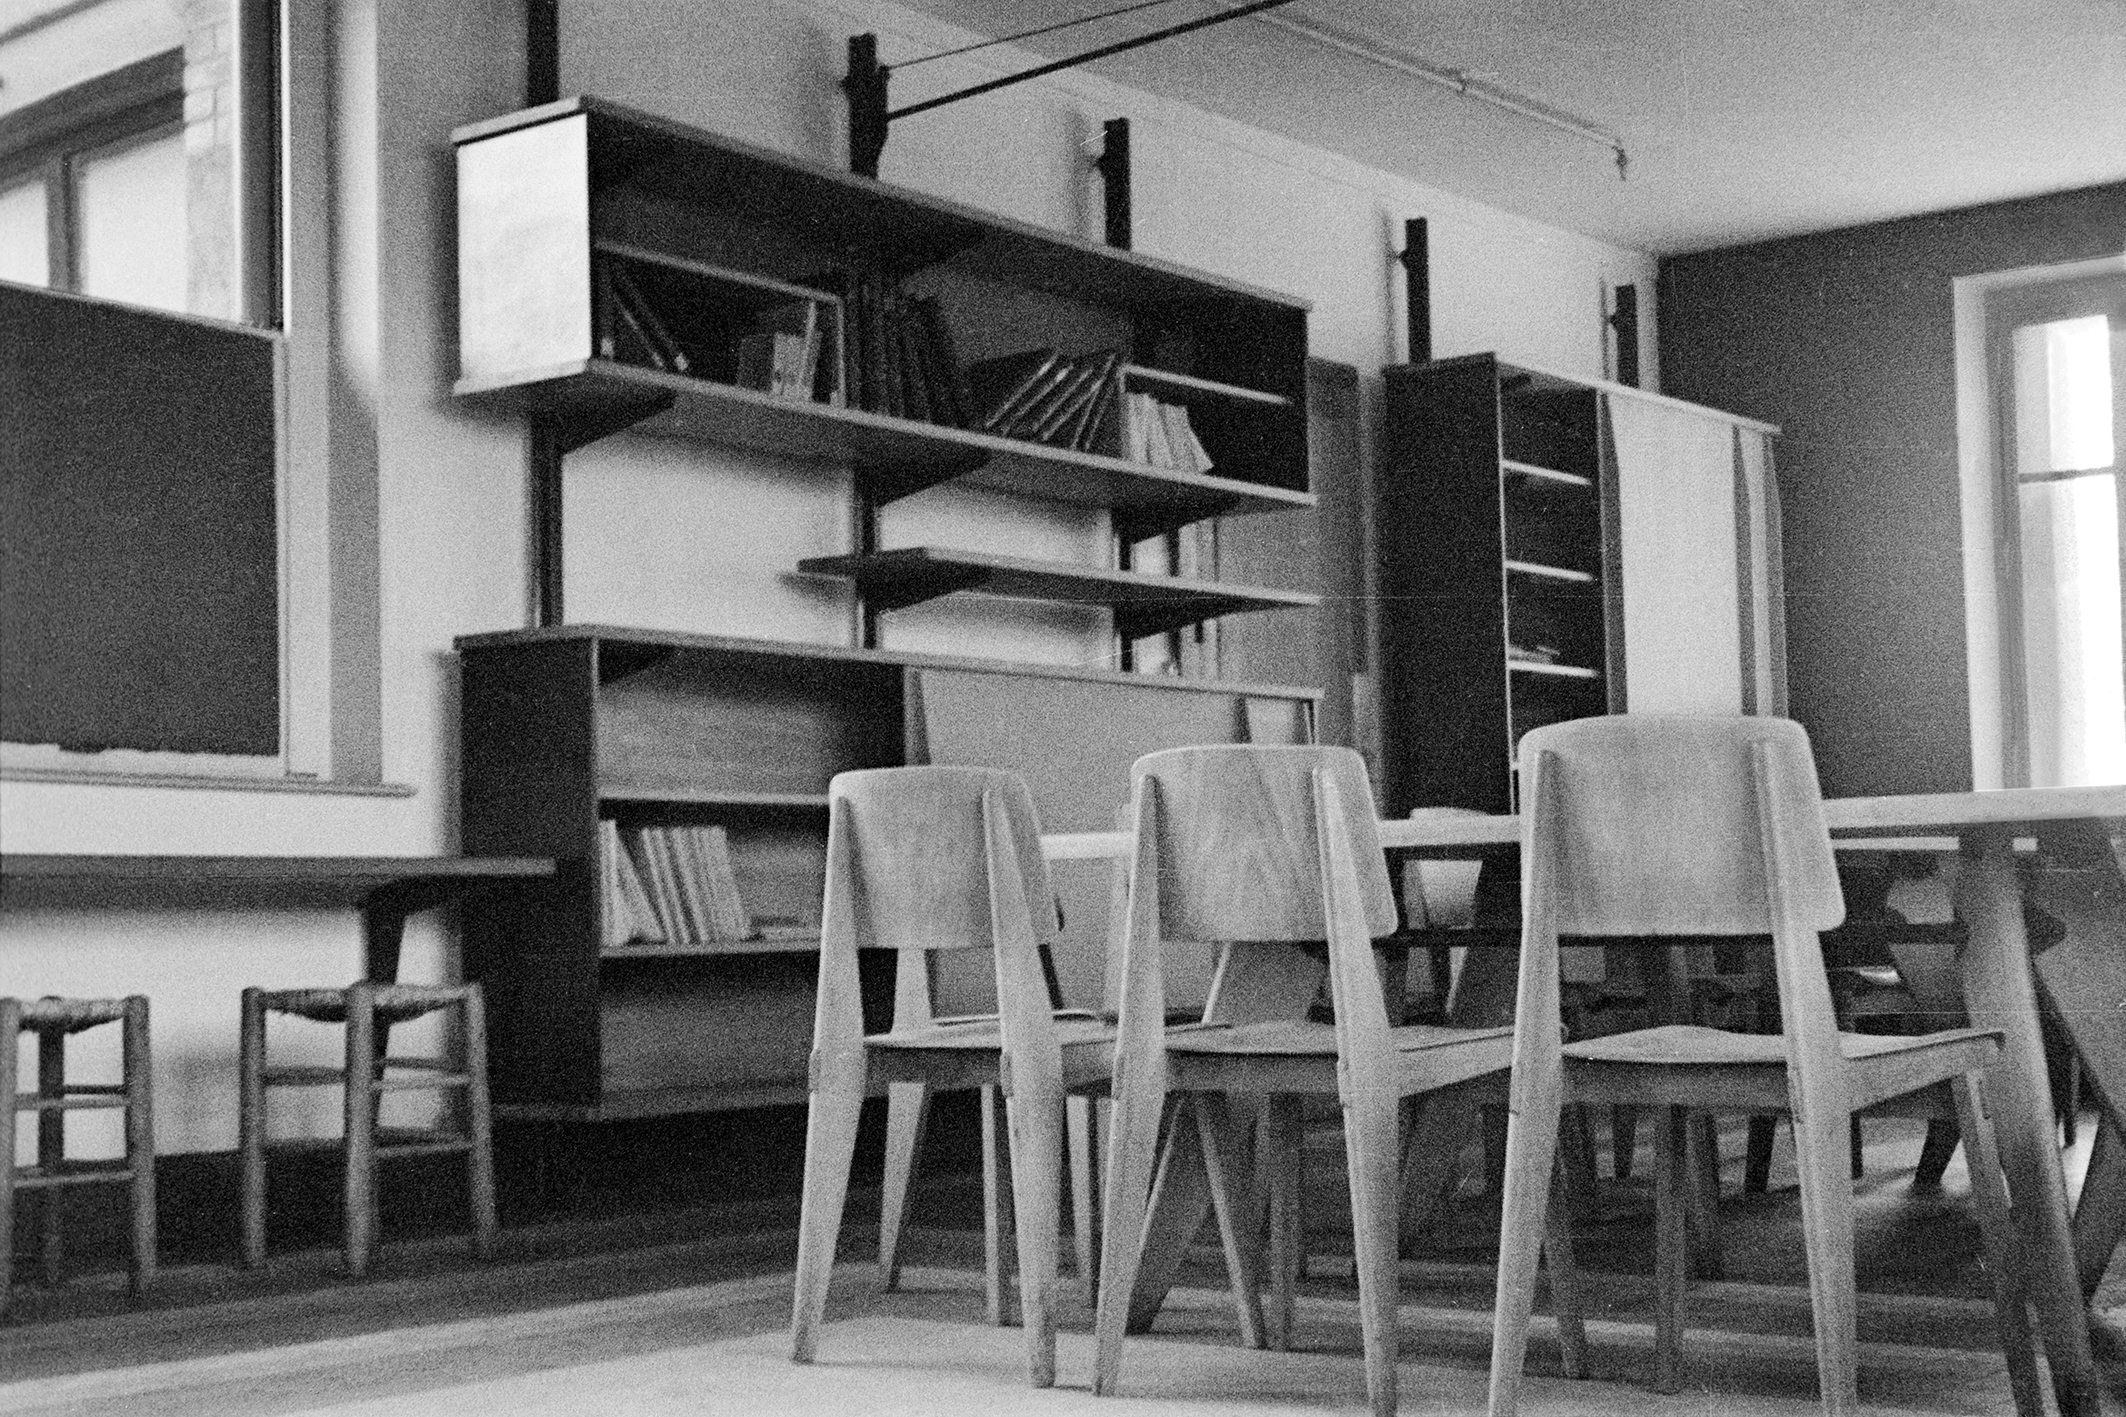 Staff center at the Berger-Levrault printing works company, Nancy, ca. 1942. Tout Bois chairs and wall fixture with support-channels.